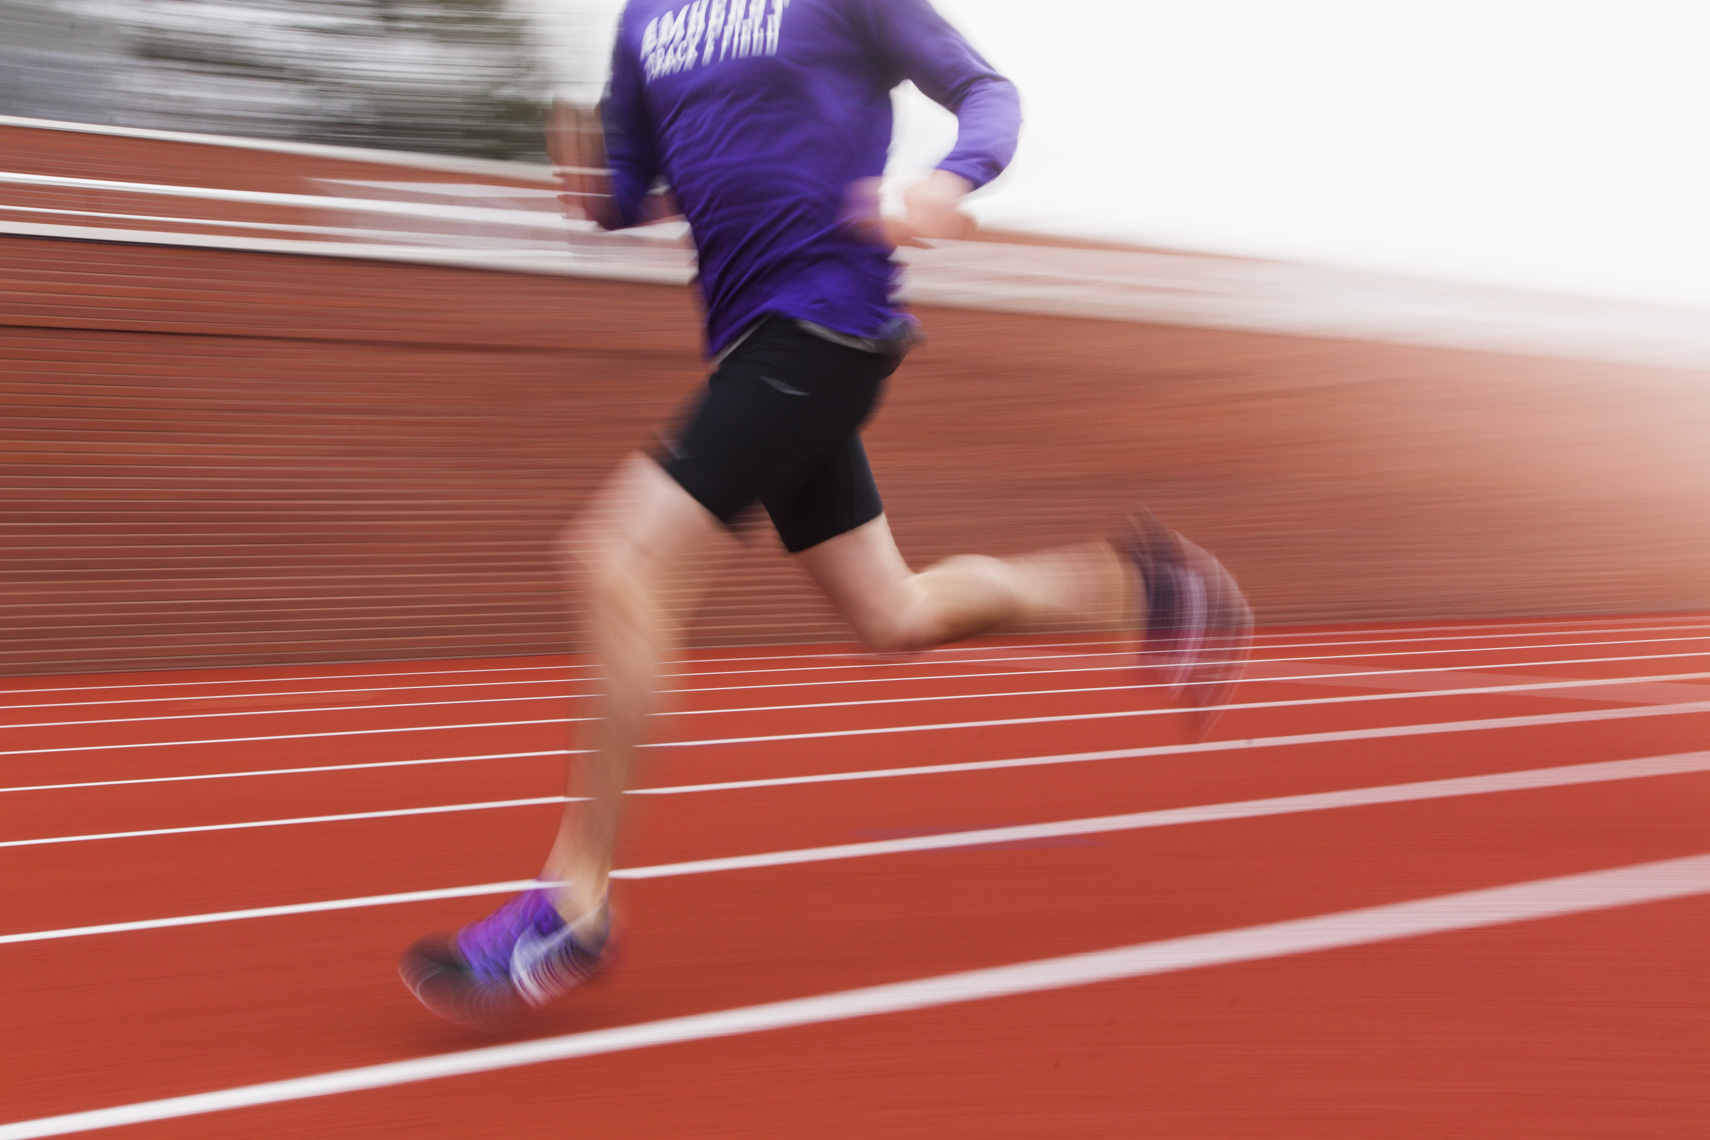 A graphic photo of a student athlete training on a track by Ryan Donnell